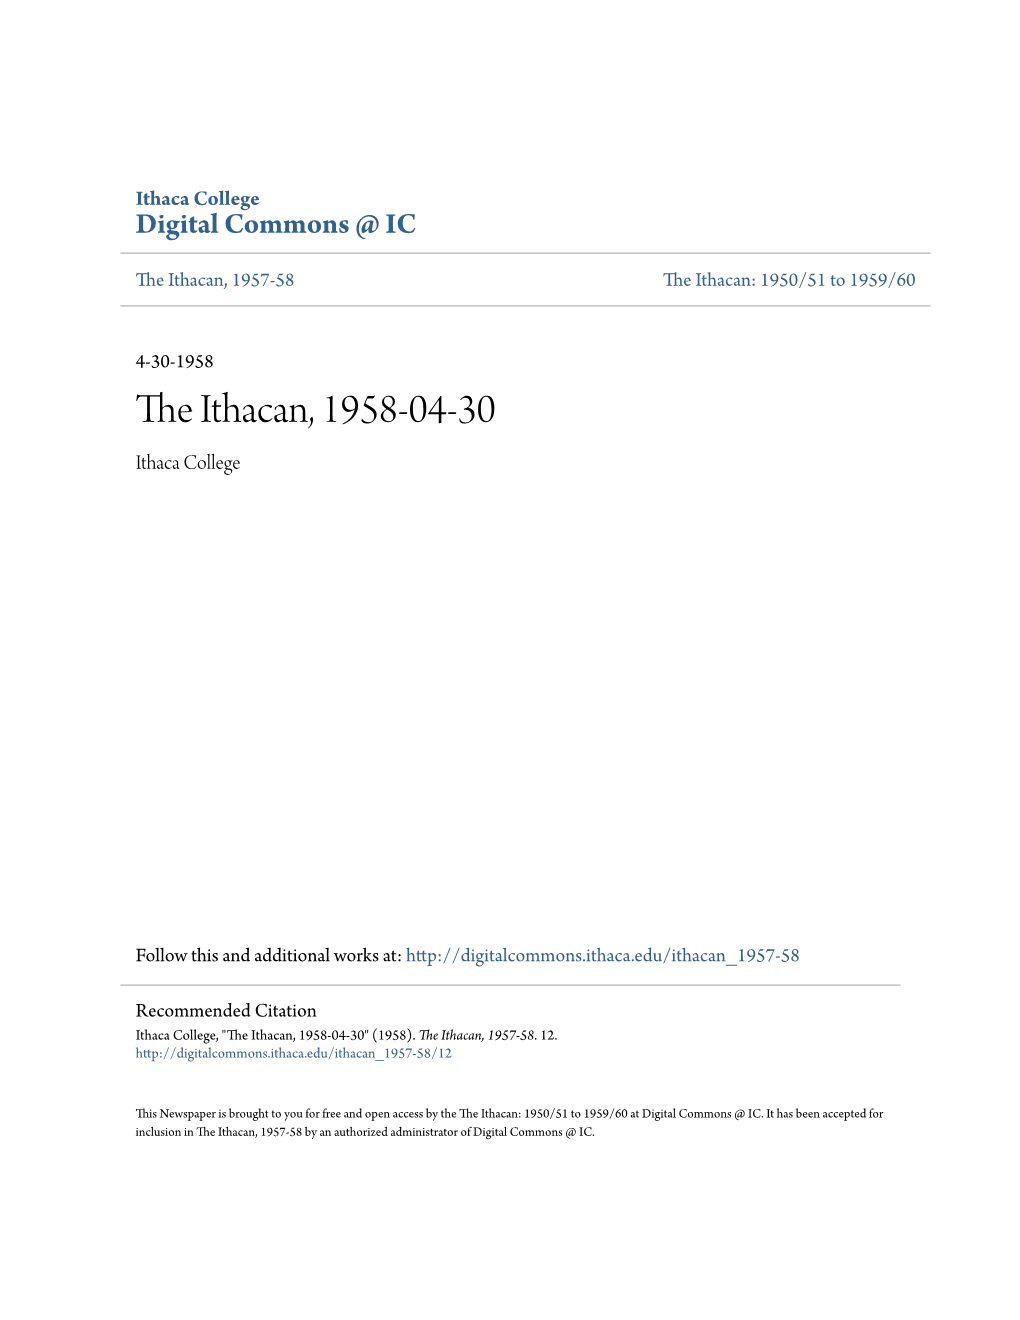 The Ithacan, 1958-04-30